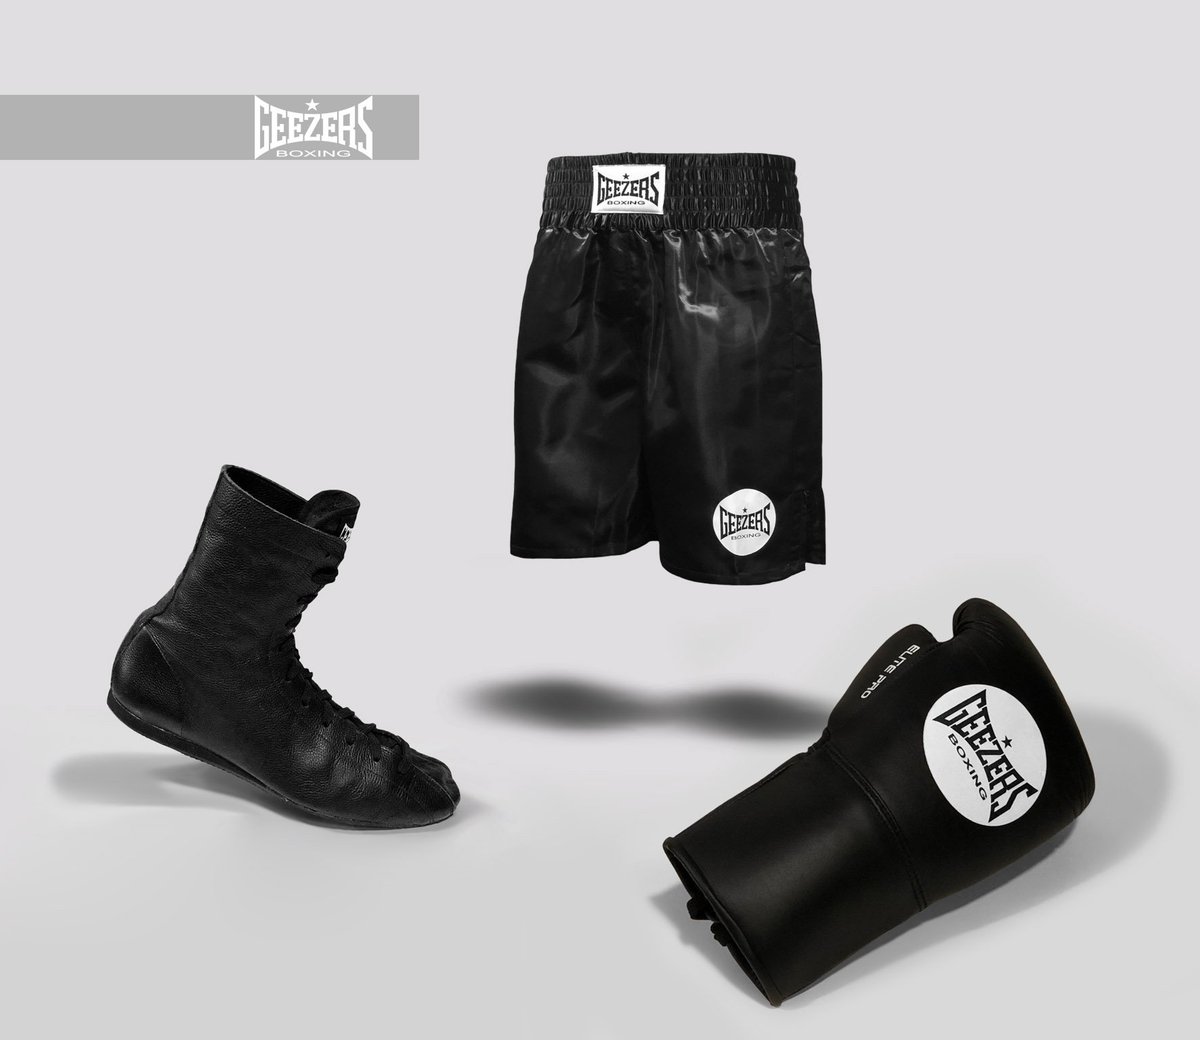 geezer boxing boots